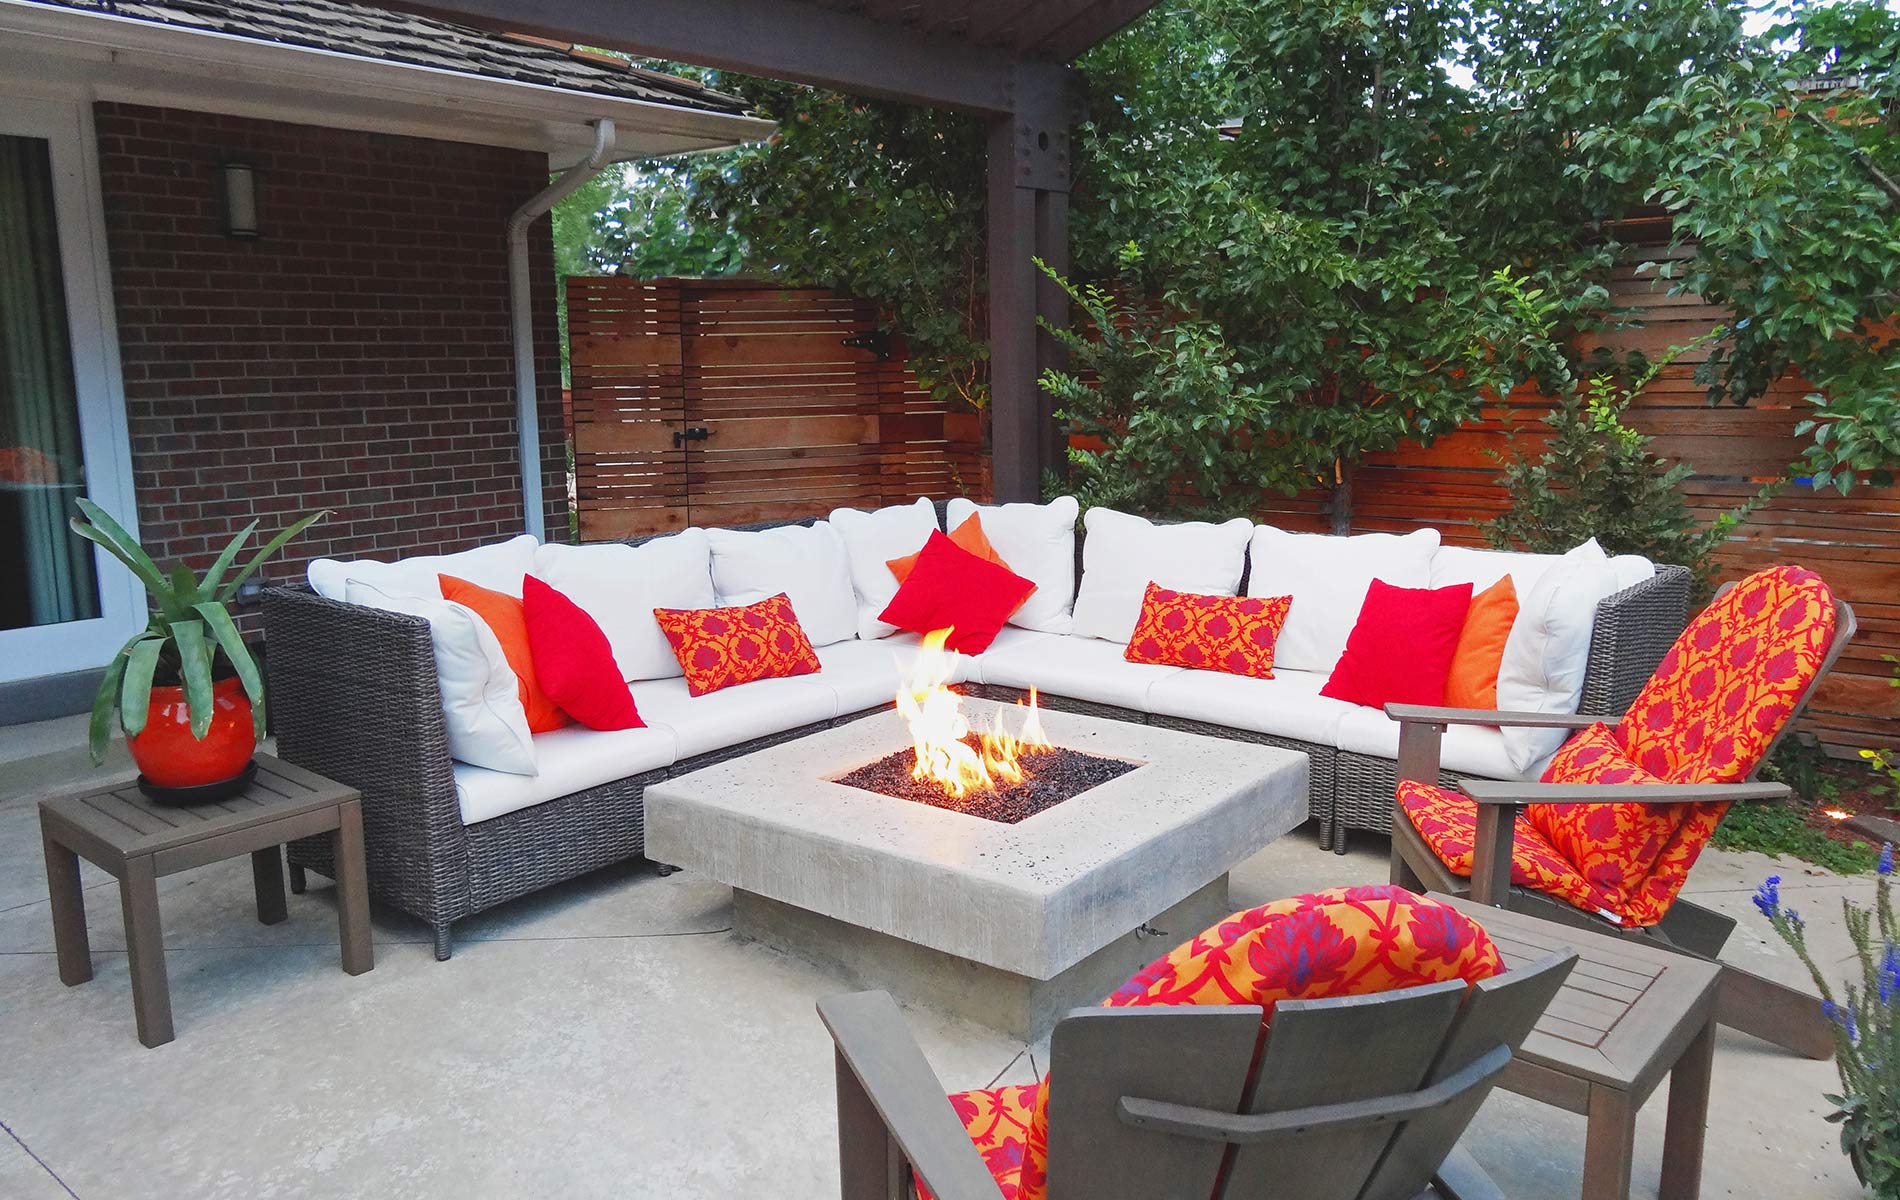 Sparkling glass topped firepit and sitting area in Award Winning Outdoor Room Mile High Landscaping in Denver